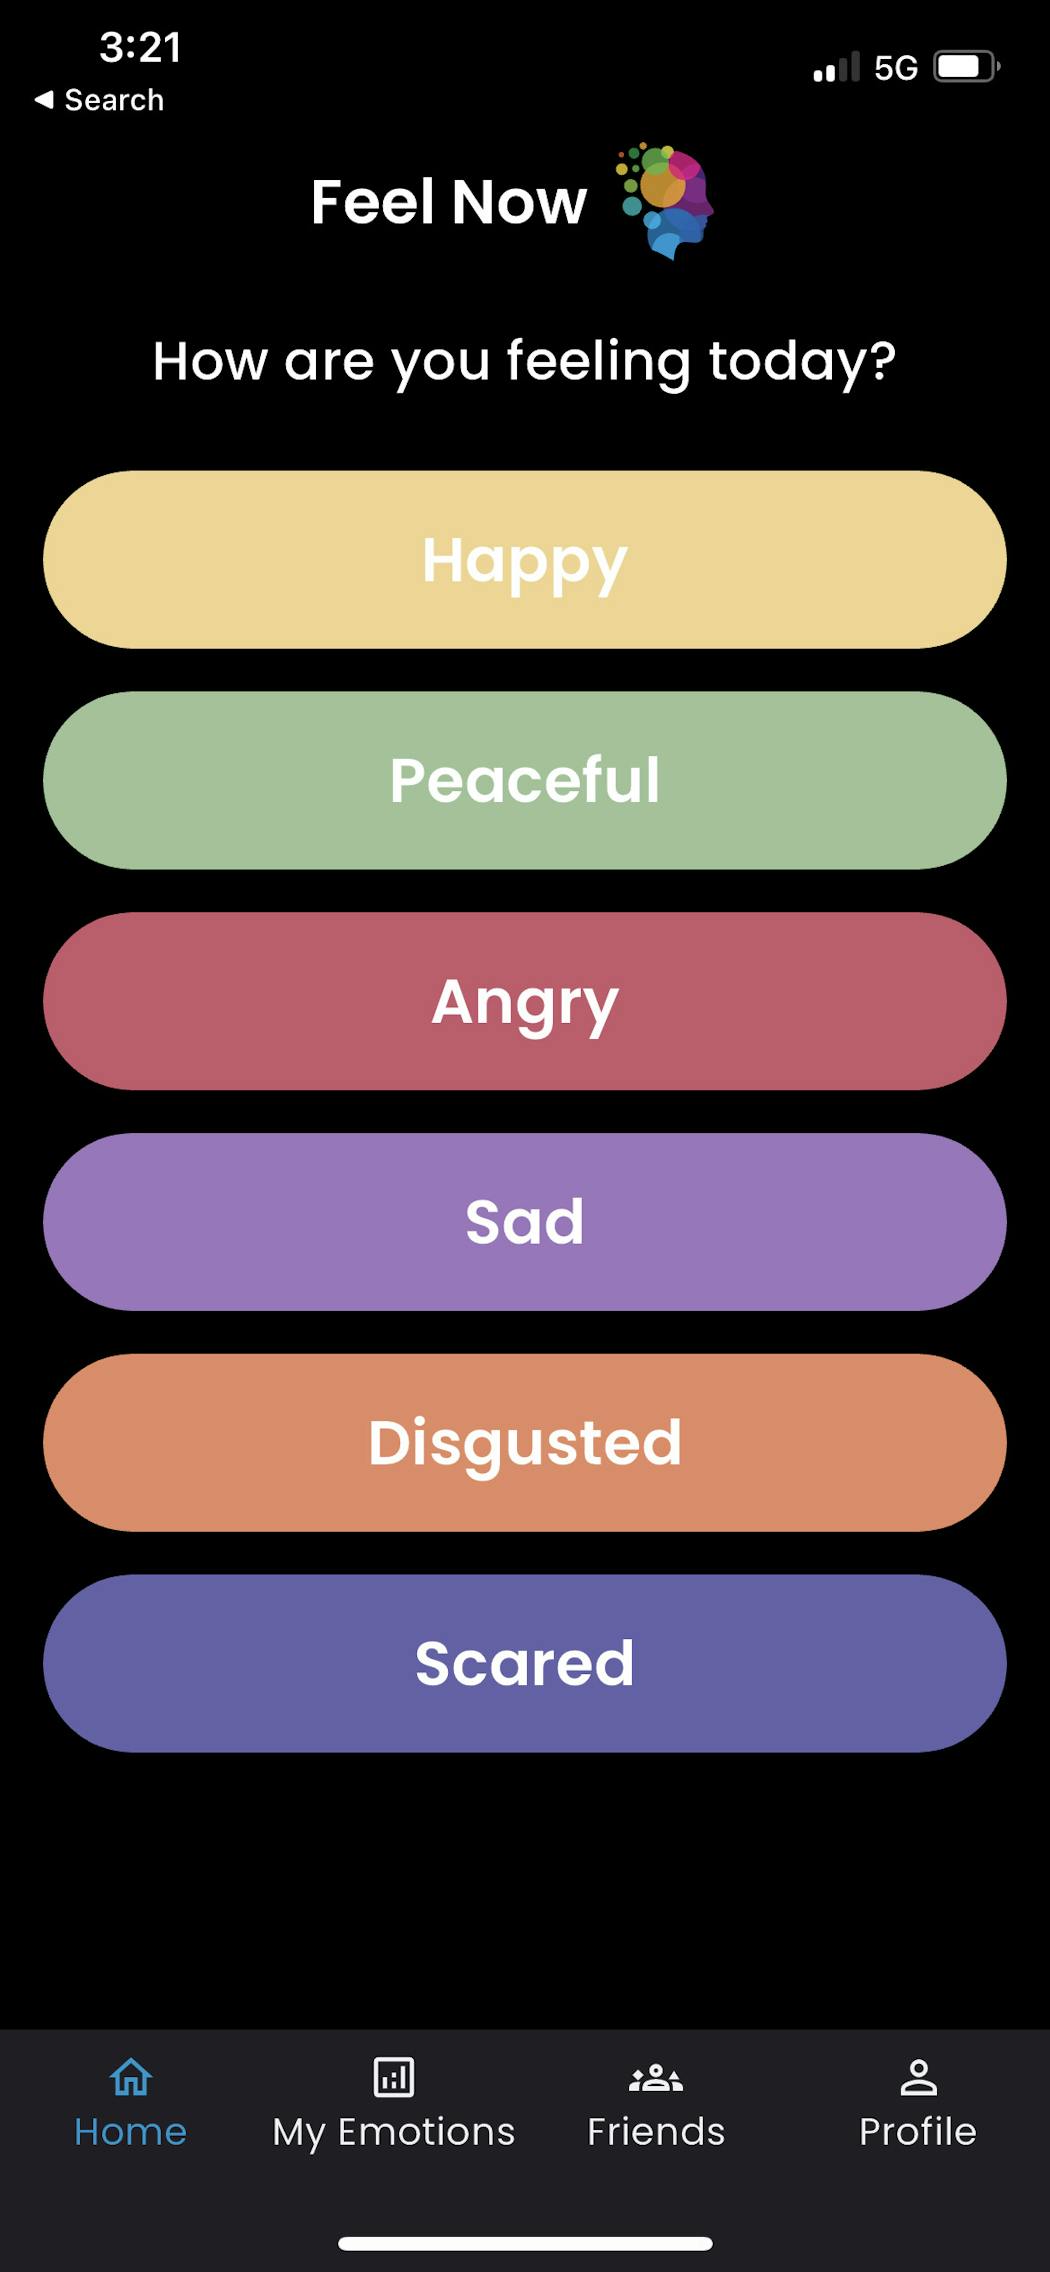 On the Feel Now main page, users can select an emotion that best describes how they’re feeling.